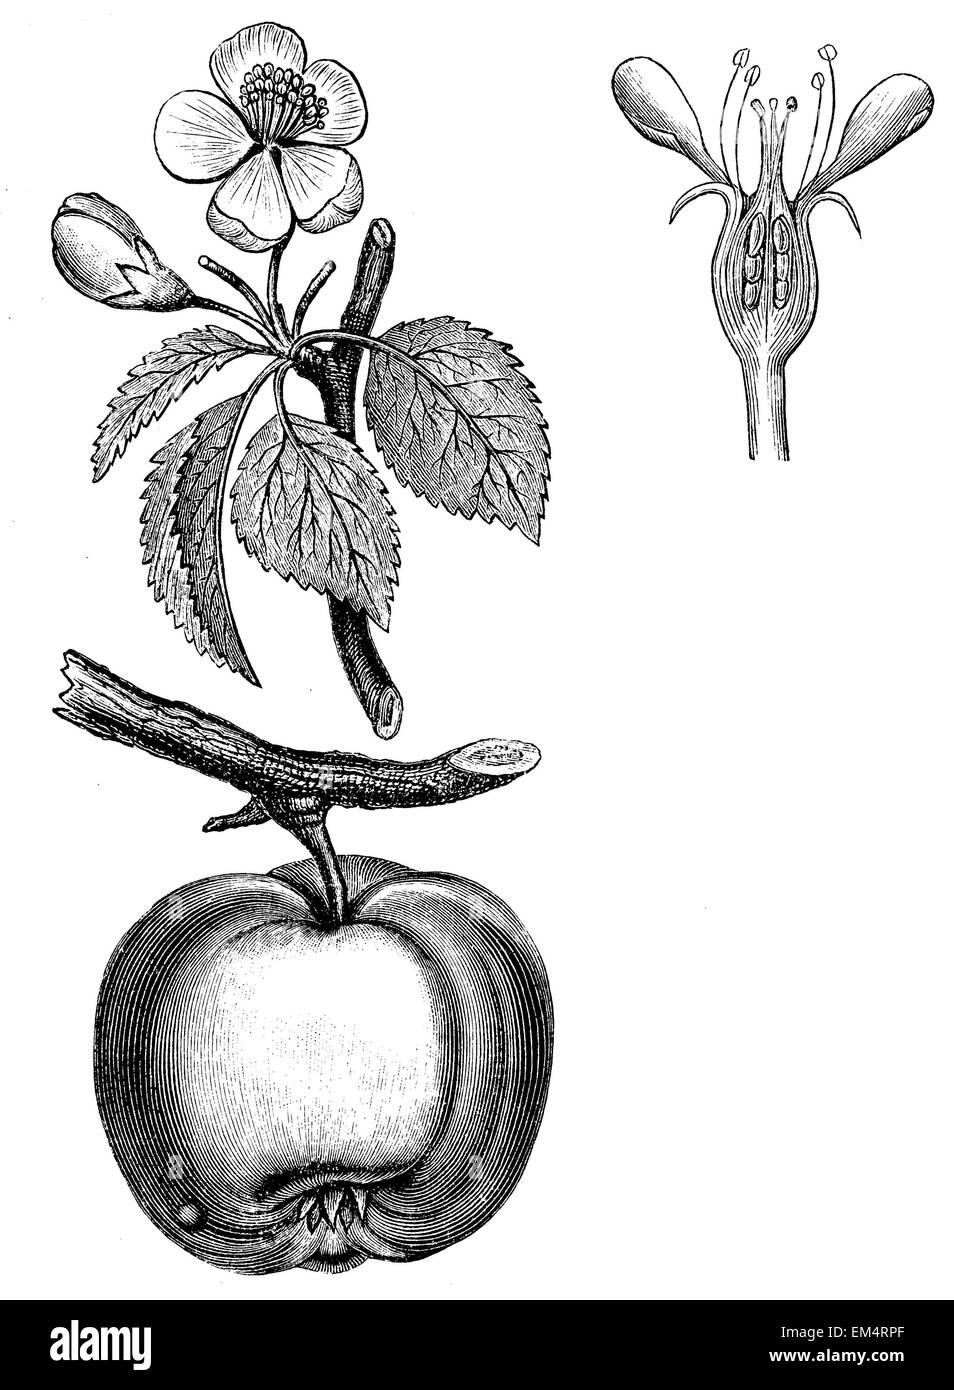 Apple, Flower and Fruit Stock Photo